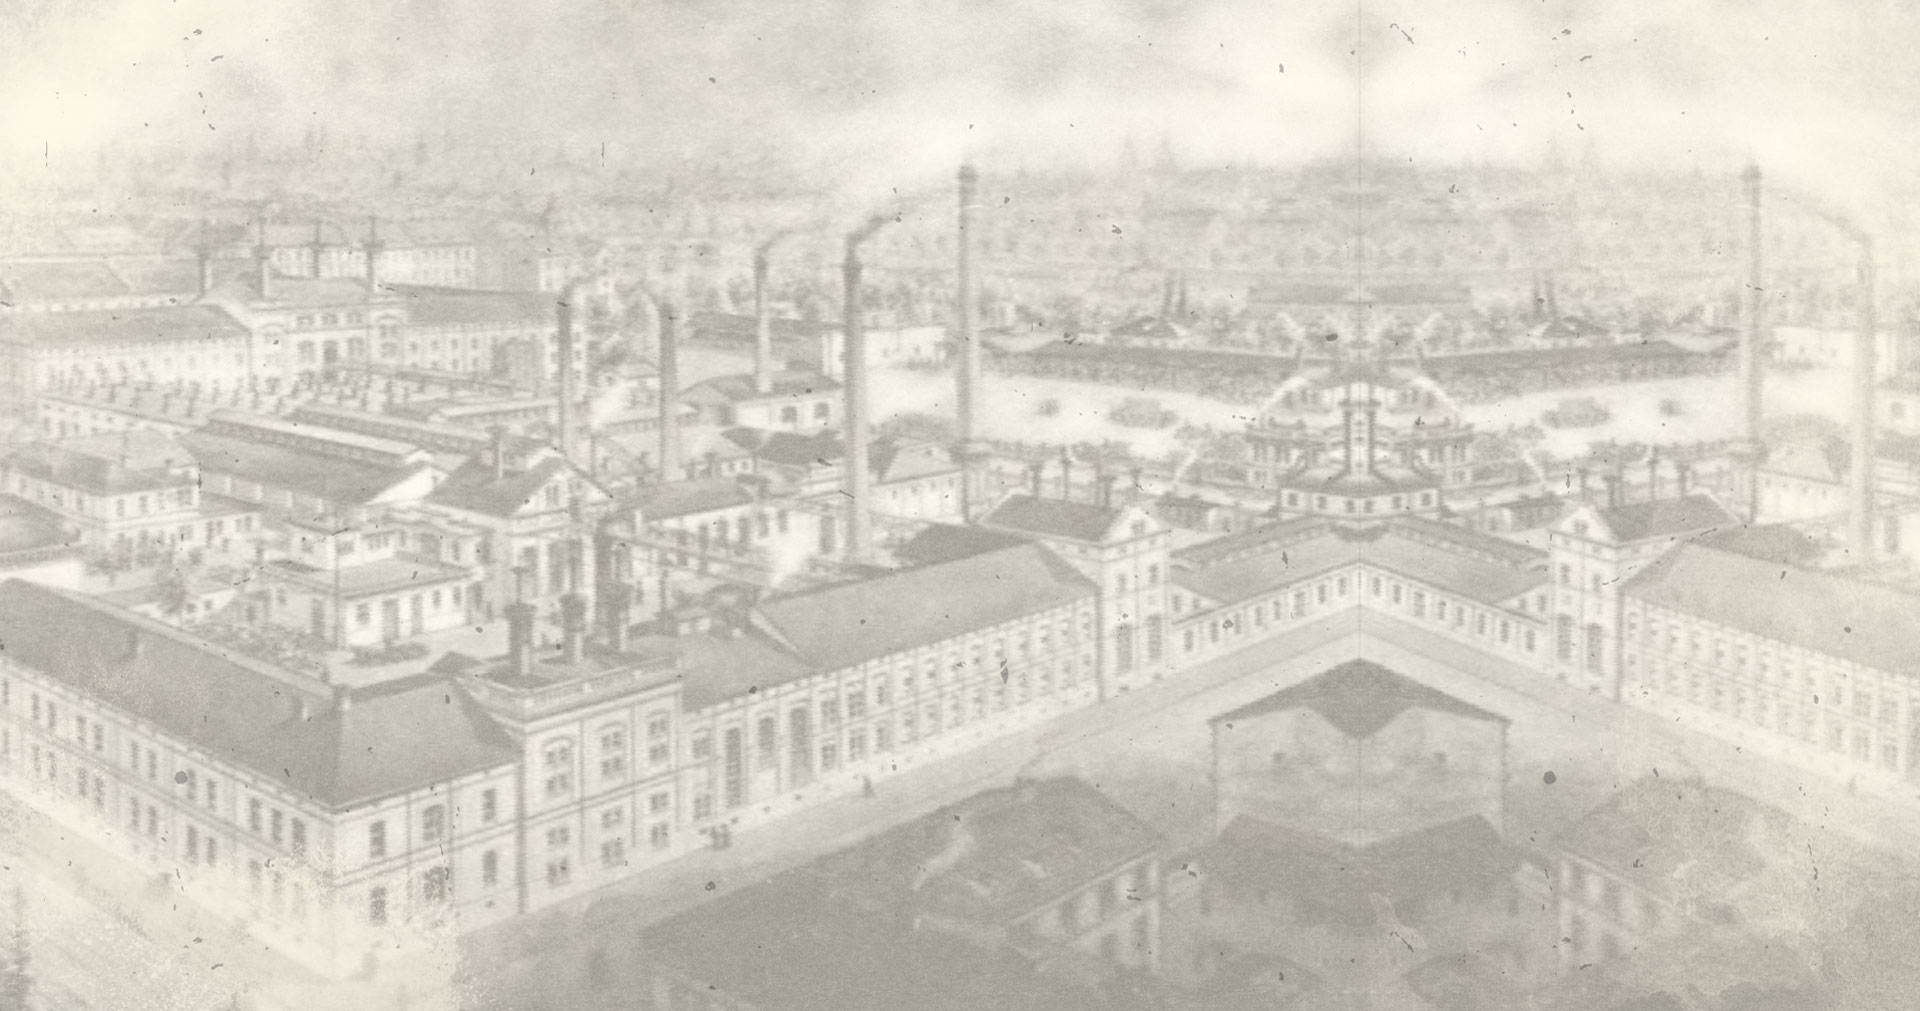 The first brewery